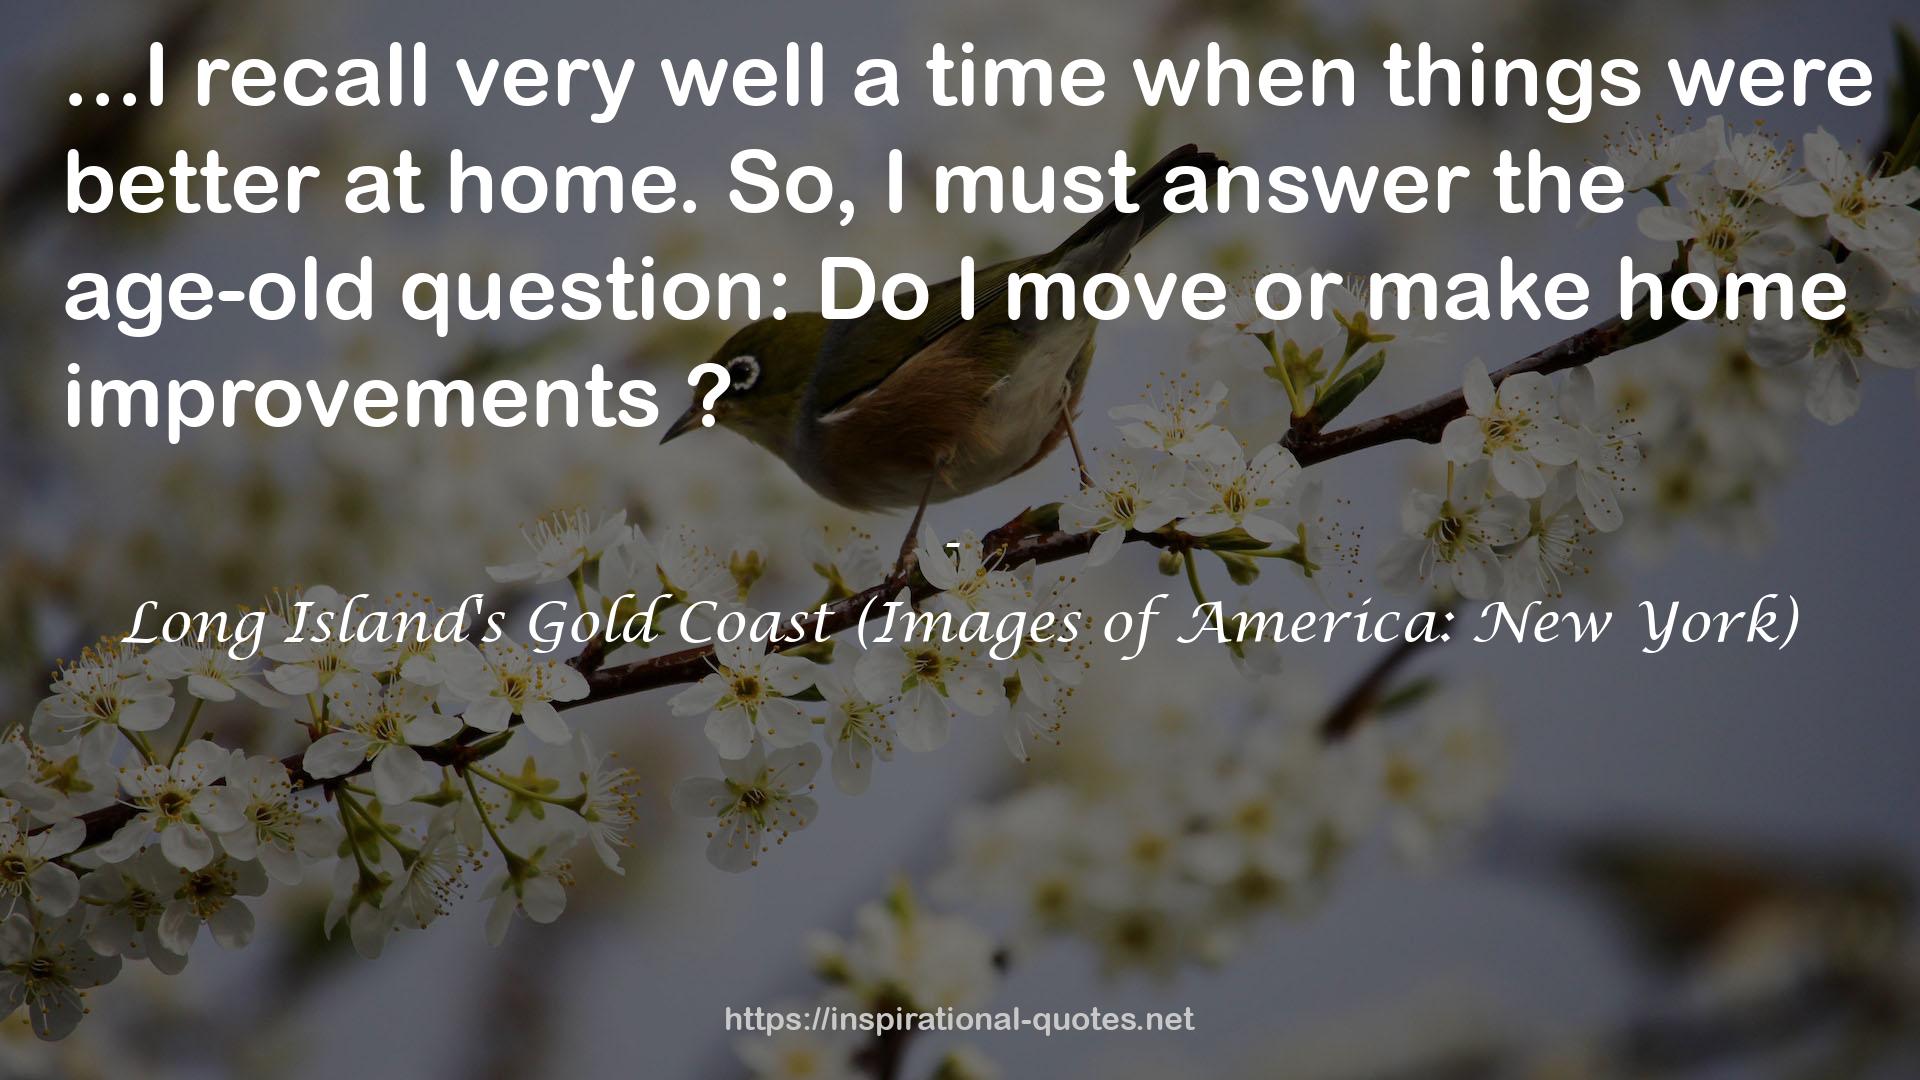 Long Island's Gold Coast (Images of America: New York) QUOTES